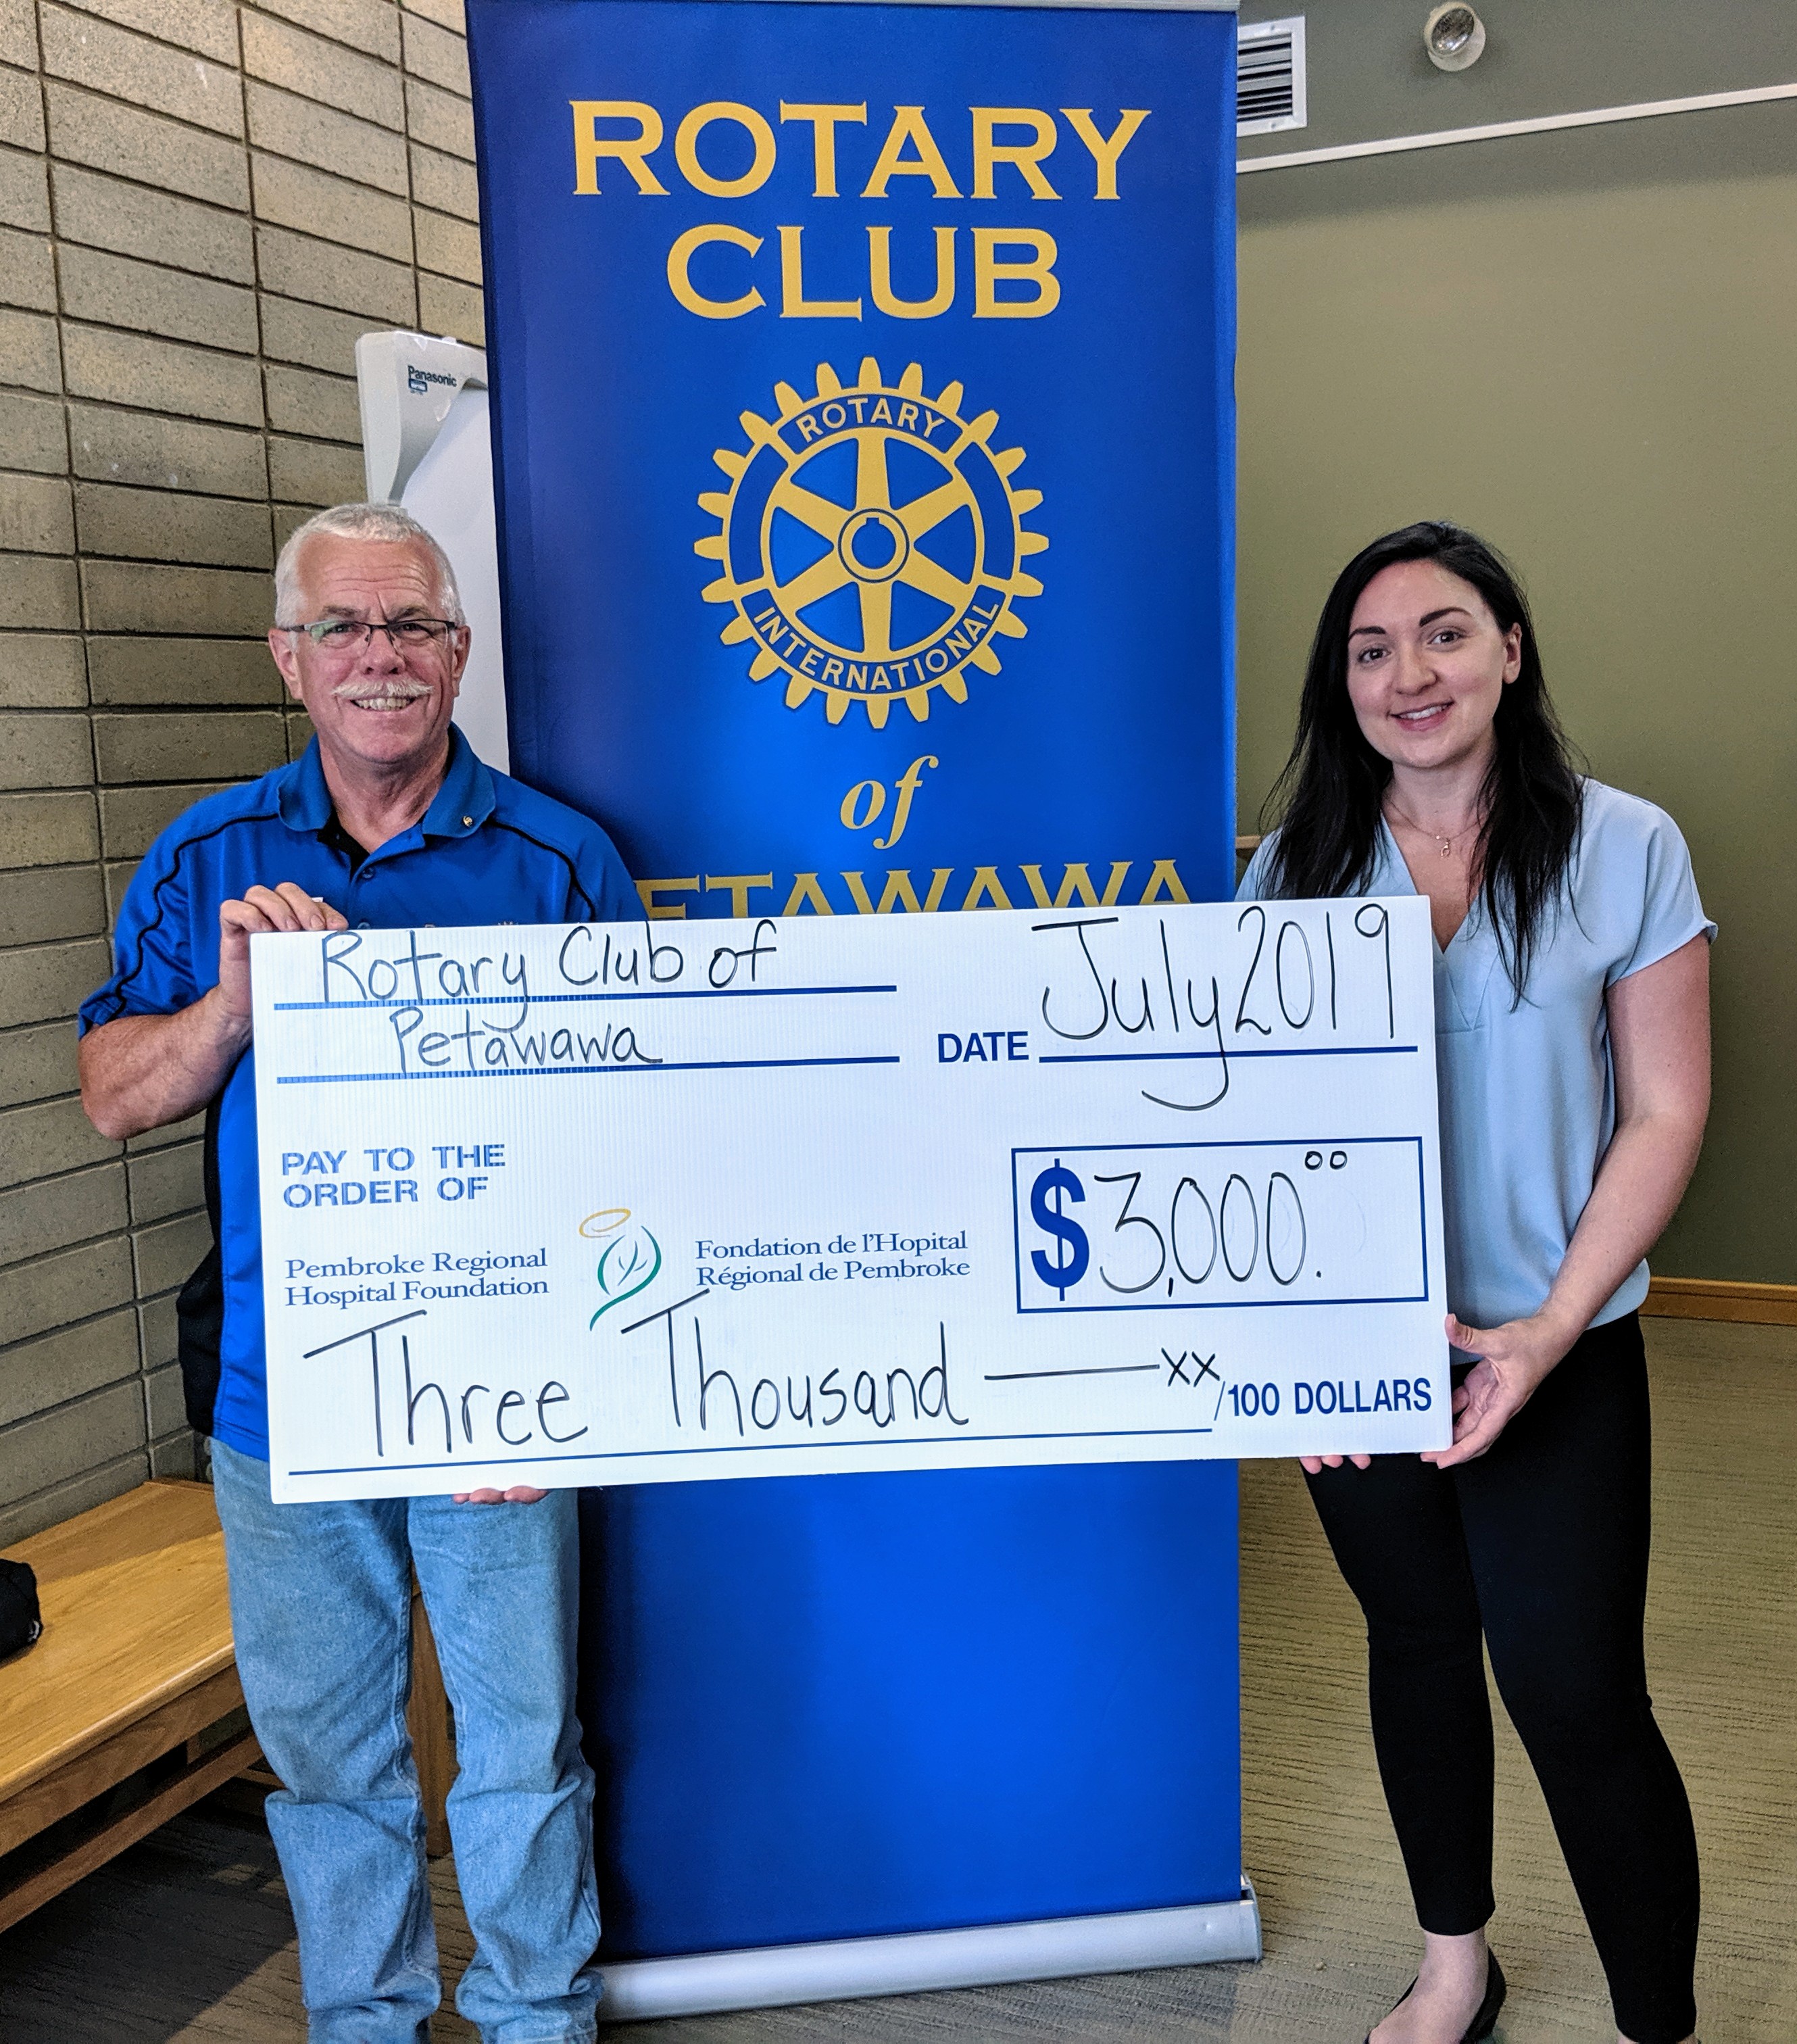 Al Freethy, President of Rotary Club Petawawa, with Sarah Neadow, Manager of Advancement at PRHF